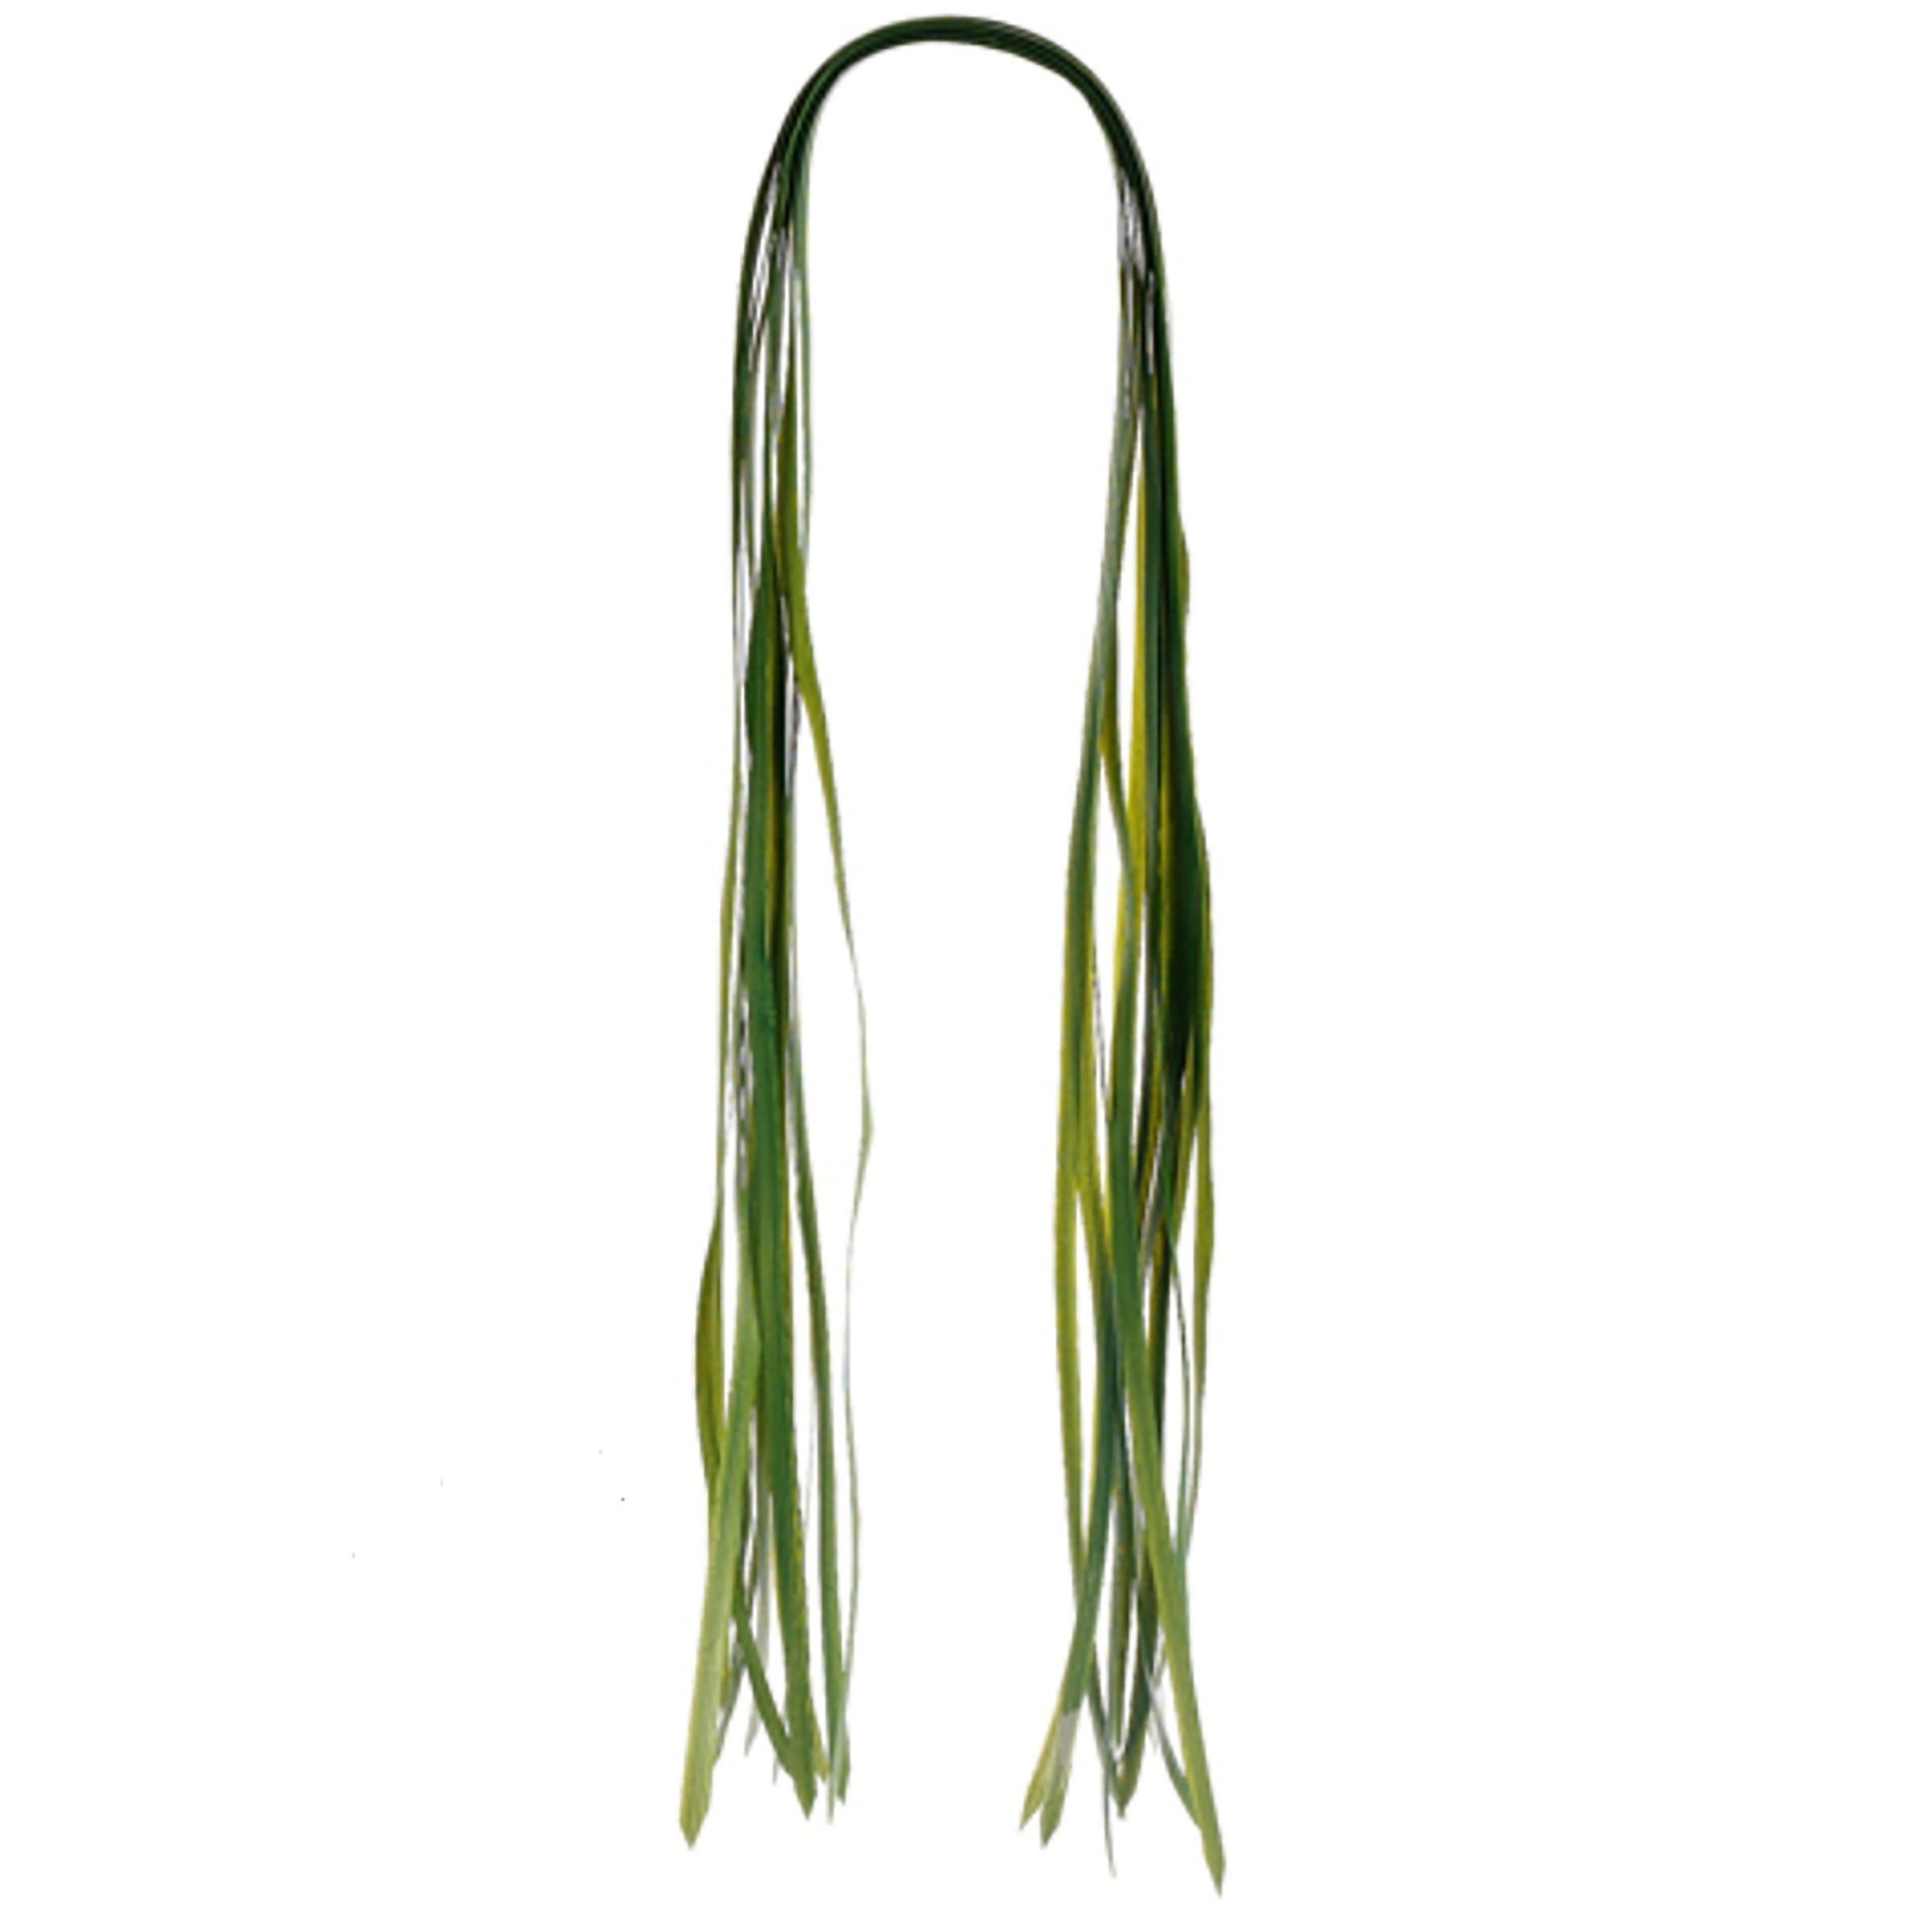 5 Artificial Greenery Leaves Stems Faux Greenery Stems Fake Plants